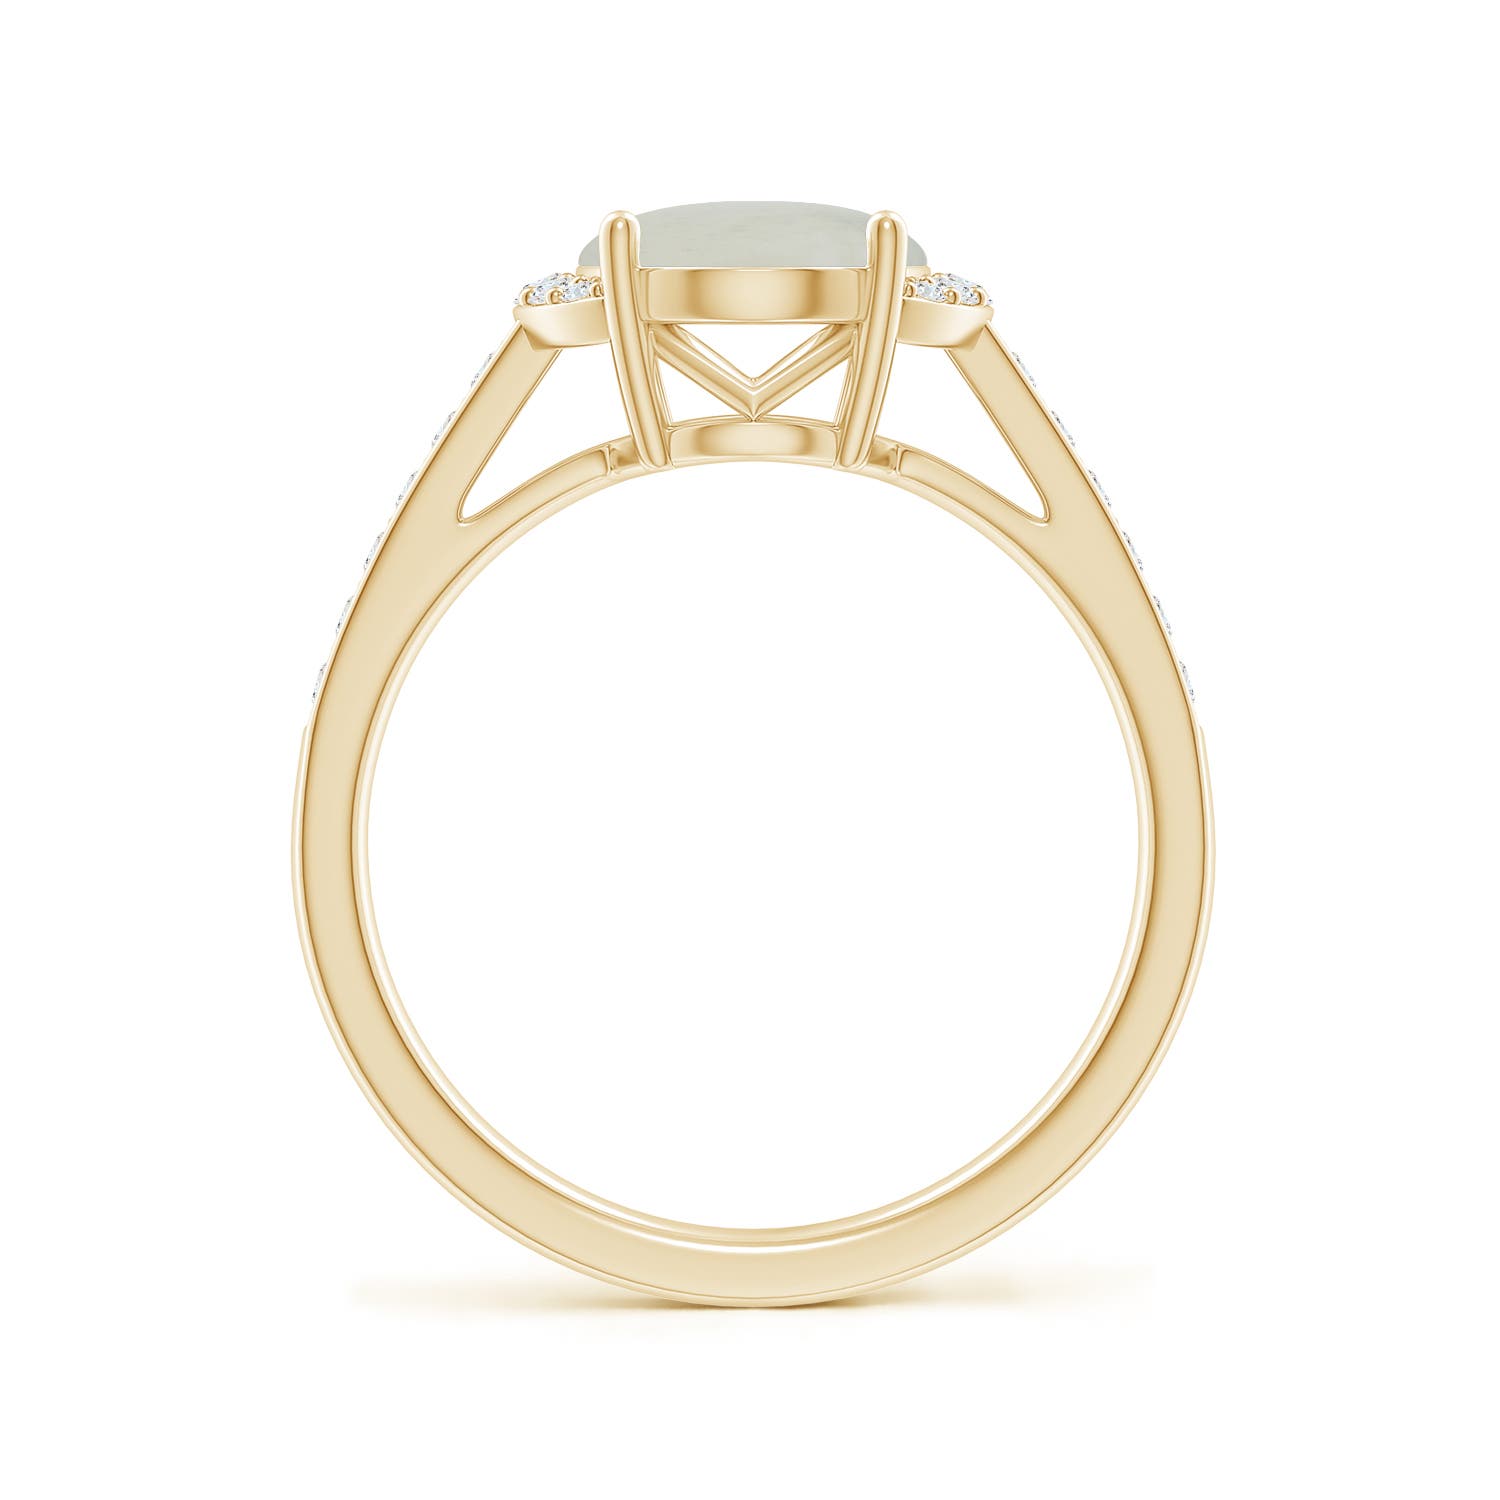 A - Moonstone / 2.75 CT / 14 KT Yellow Gold